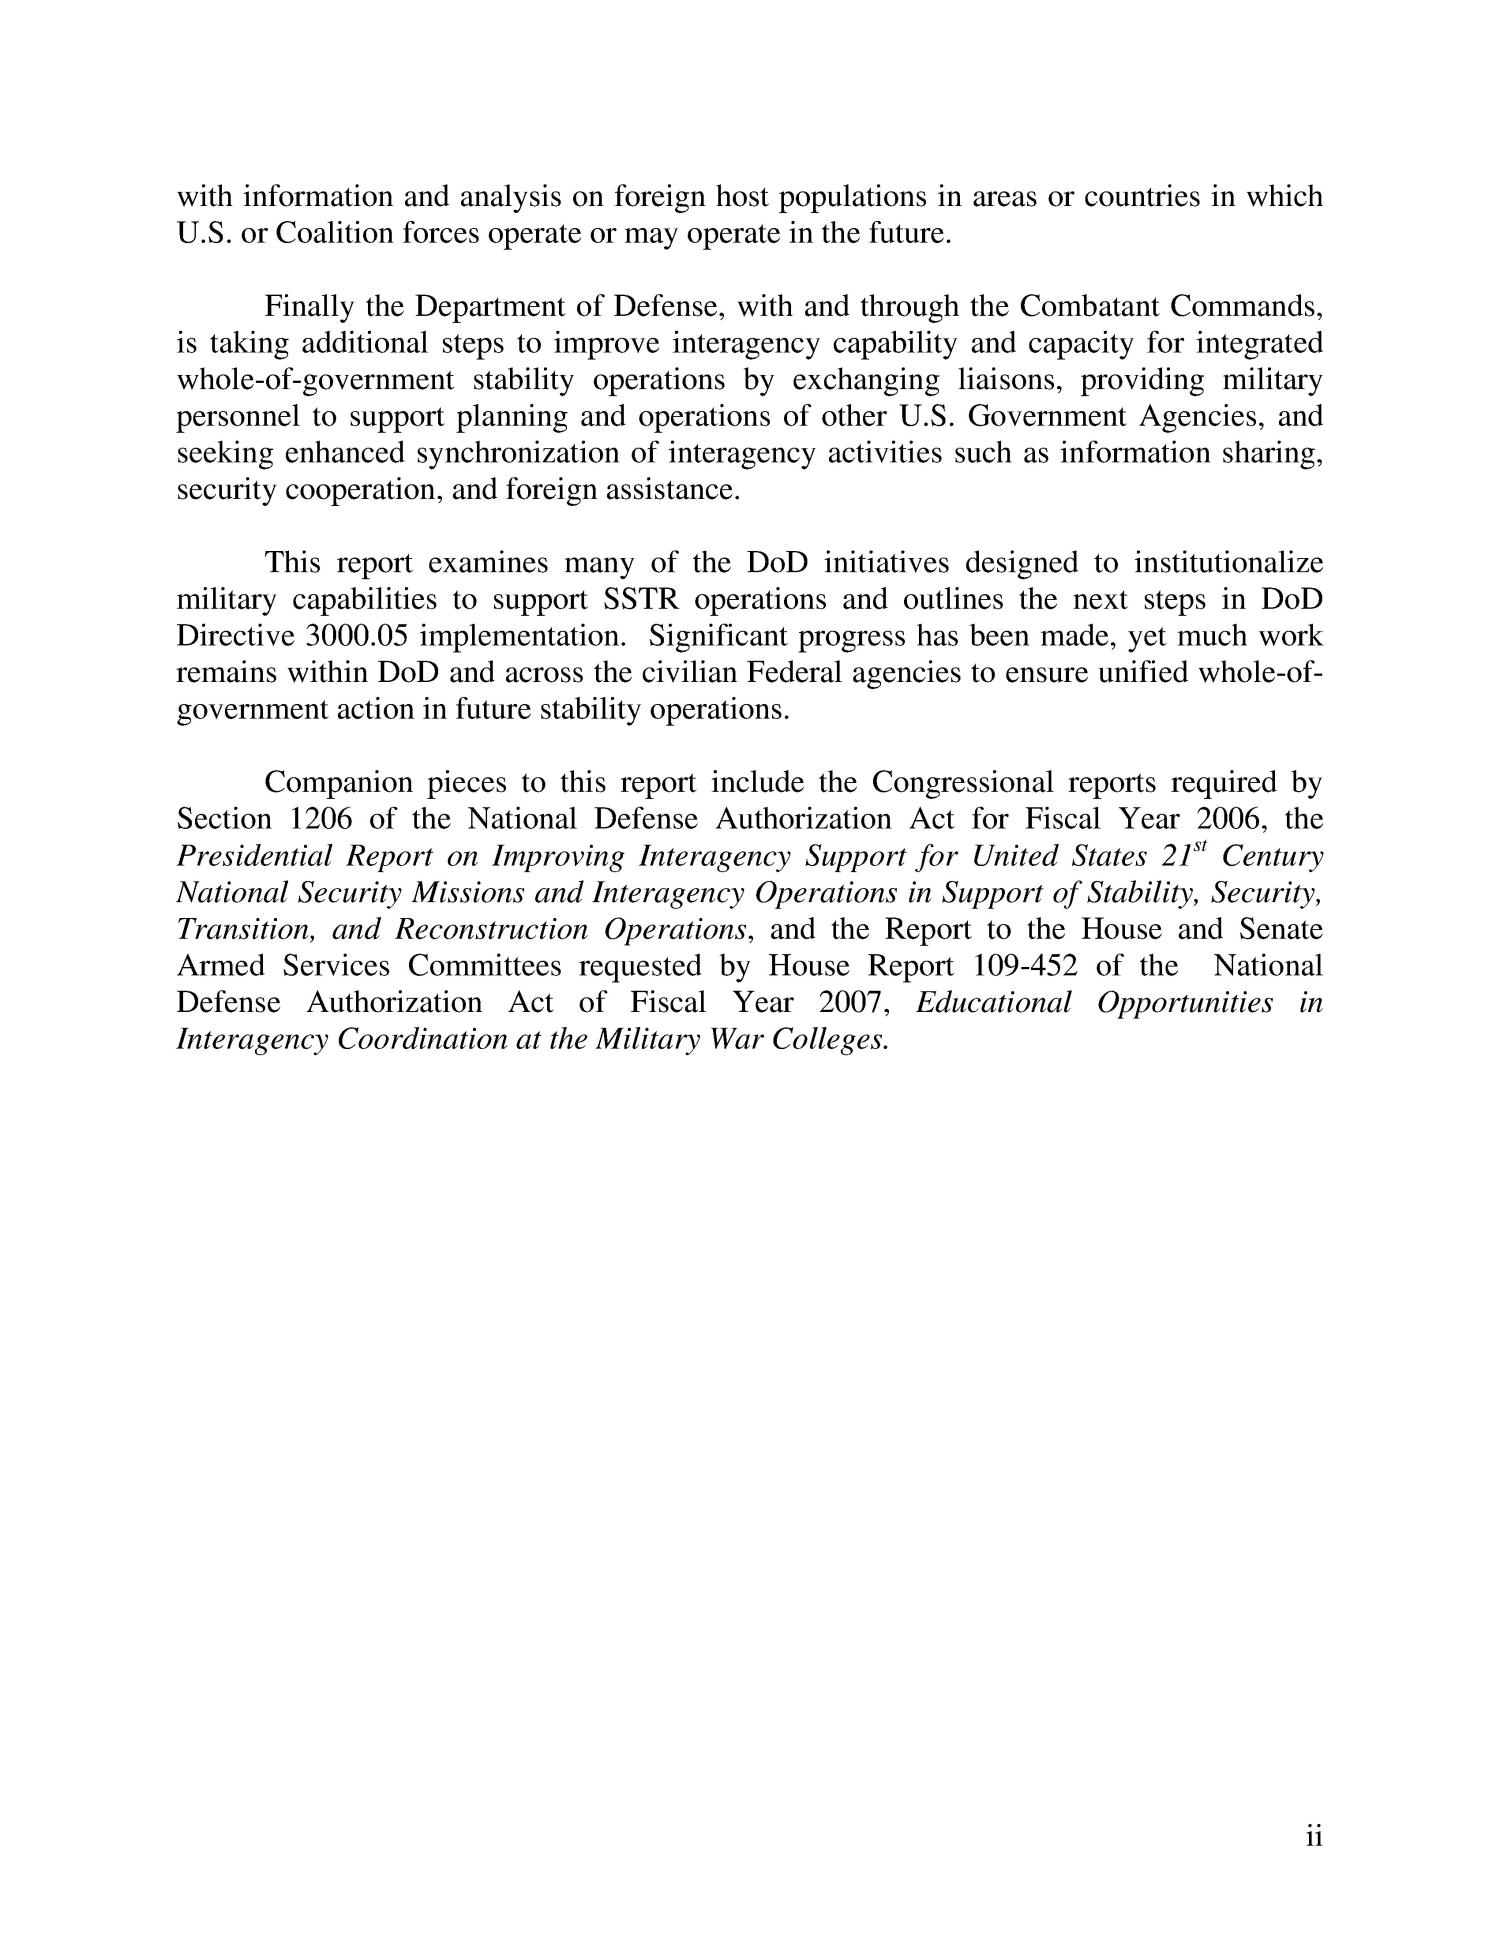 Report To Congress On The Implementation of DoD Directive 3000.05 Military Support For Stability, Security, Transition and Reconstruction (SSTR) Operations
                                                
                                                    [Sequence #]: 4 of 35
                                                